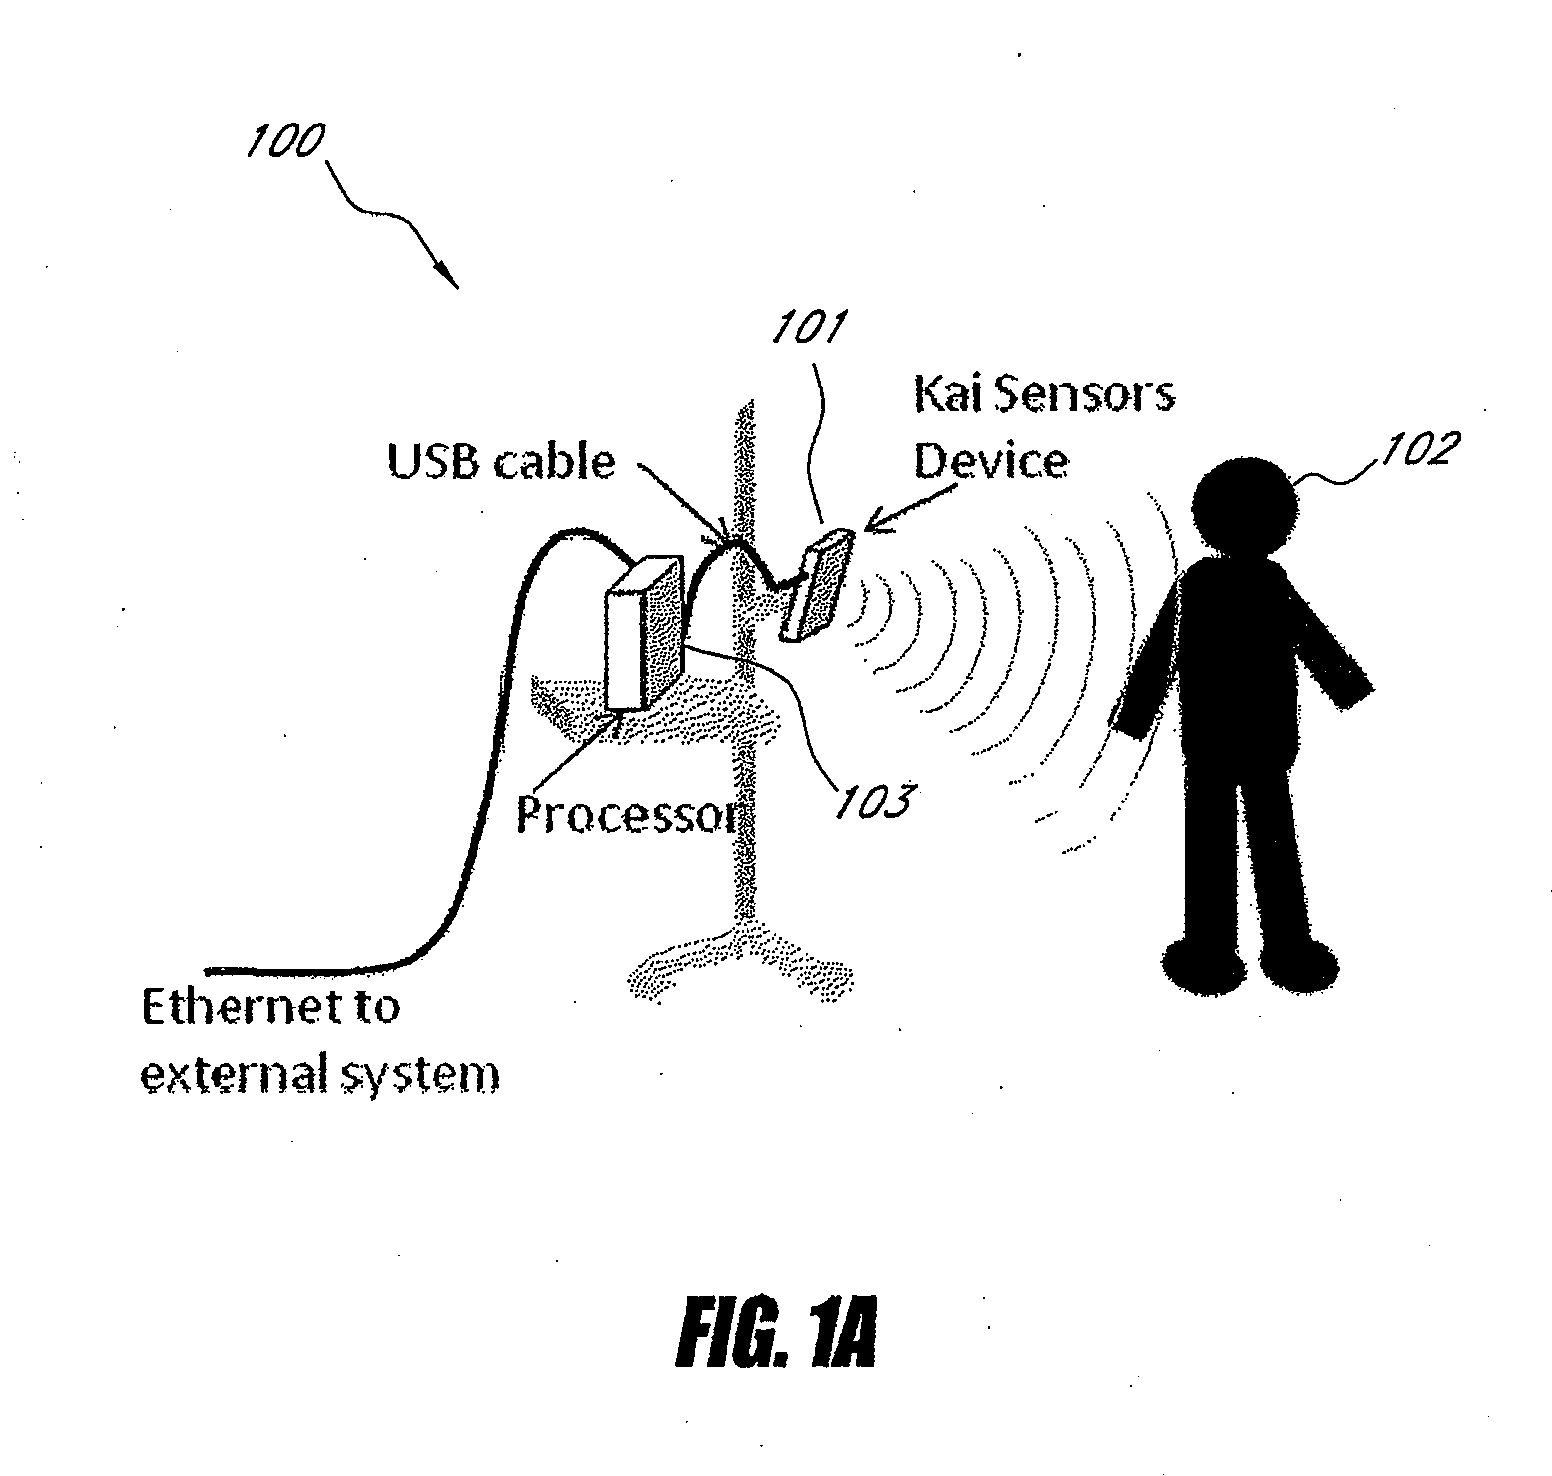 Systems and methods for non-contact multiparameter vital signs monitoring, apnea therapy, apnea diagnosis, and snore therapy